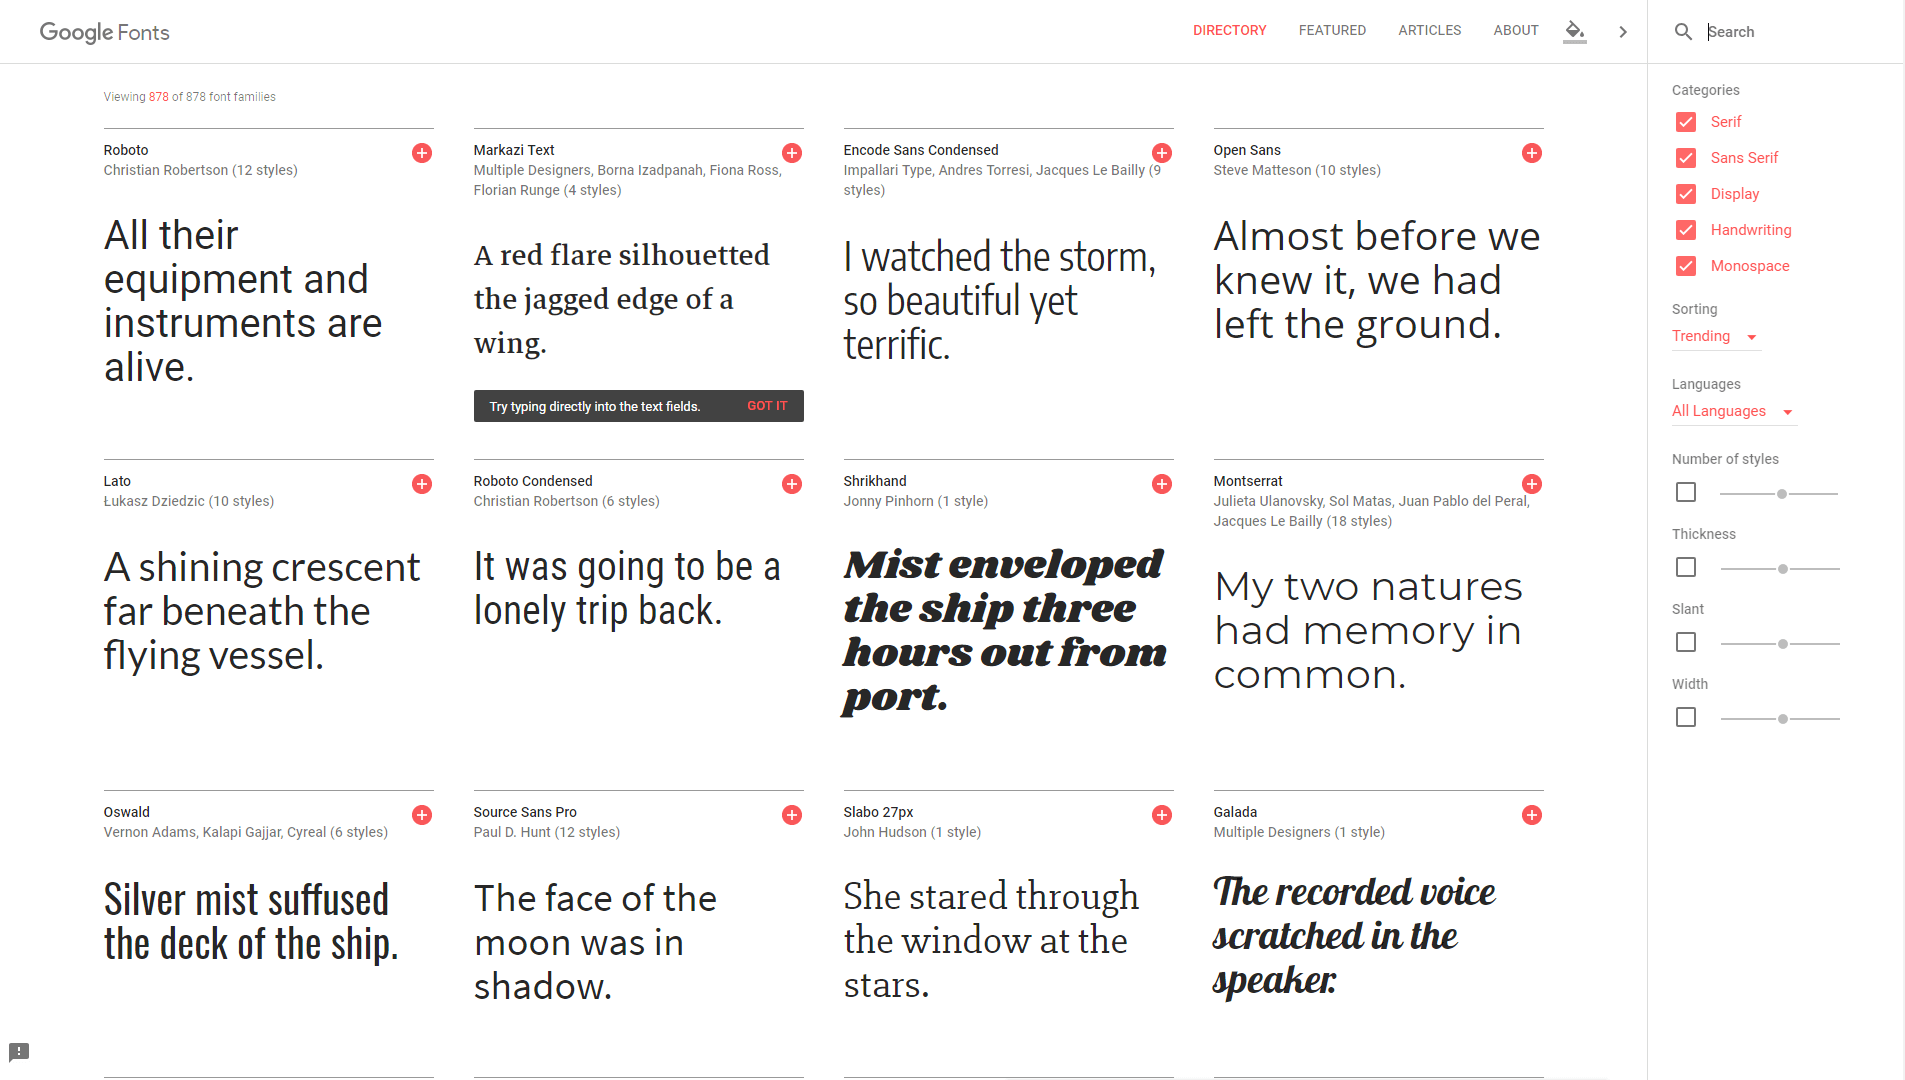 The Google Fonts homepage.